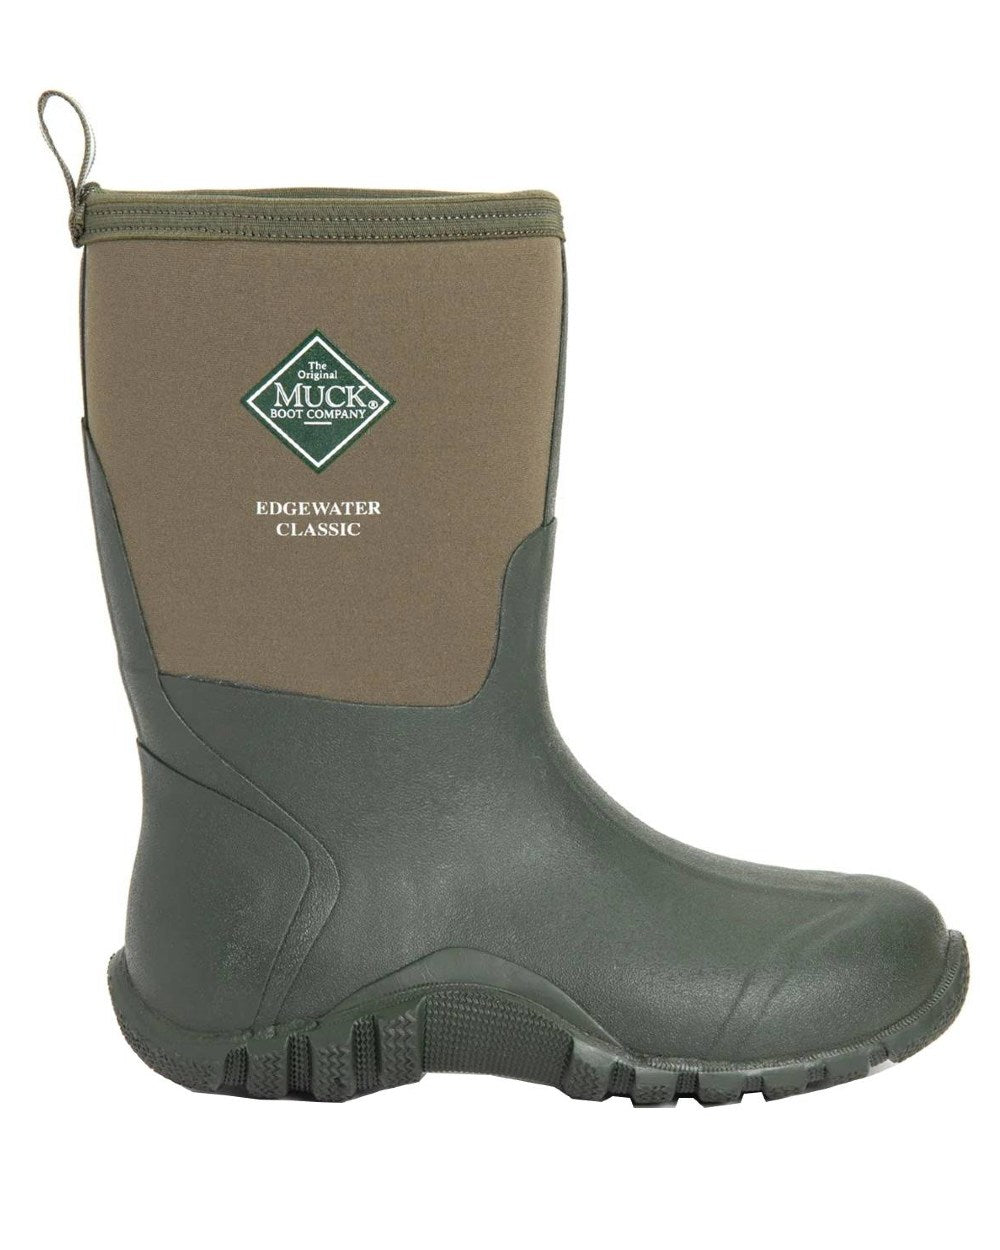 Moss Coloured Muck Boots Unisex Edgewater Classic Short Boots On A White Background 